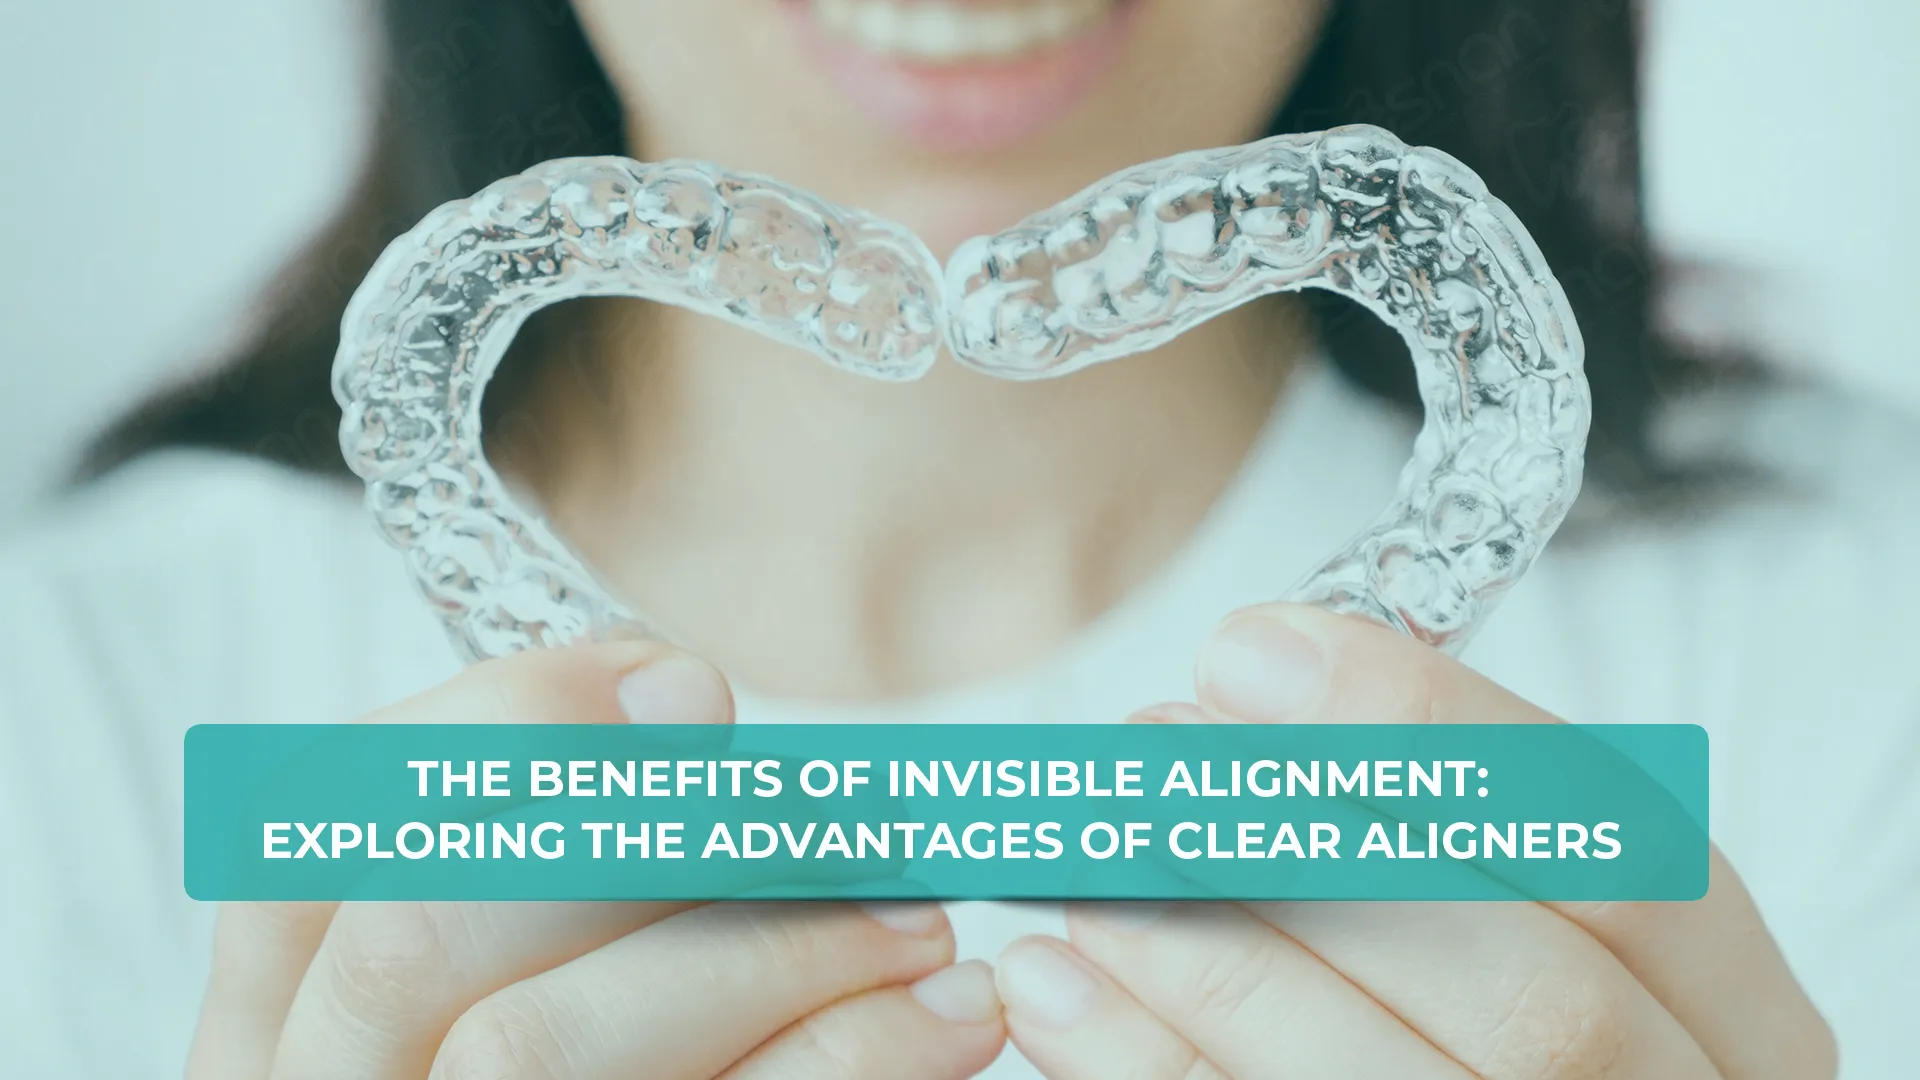 Achieve a flawless smile with clear aligners in Turkey. Benefit from advanced, discreet orthodontic treatment at an affordable price in top Turkish clinics.